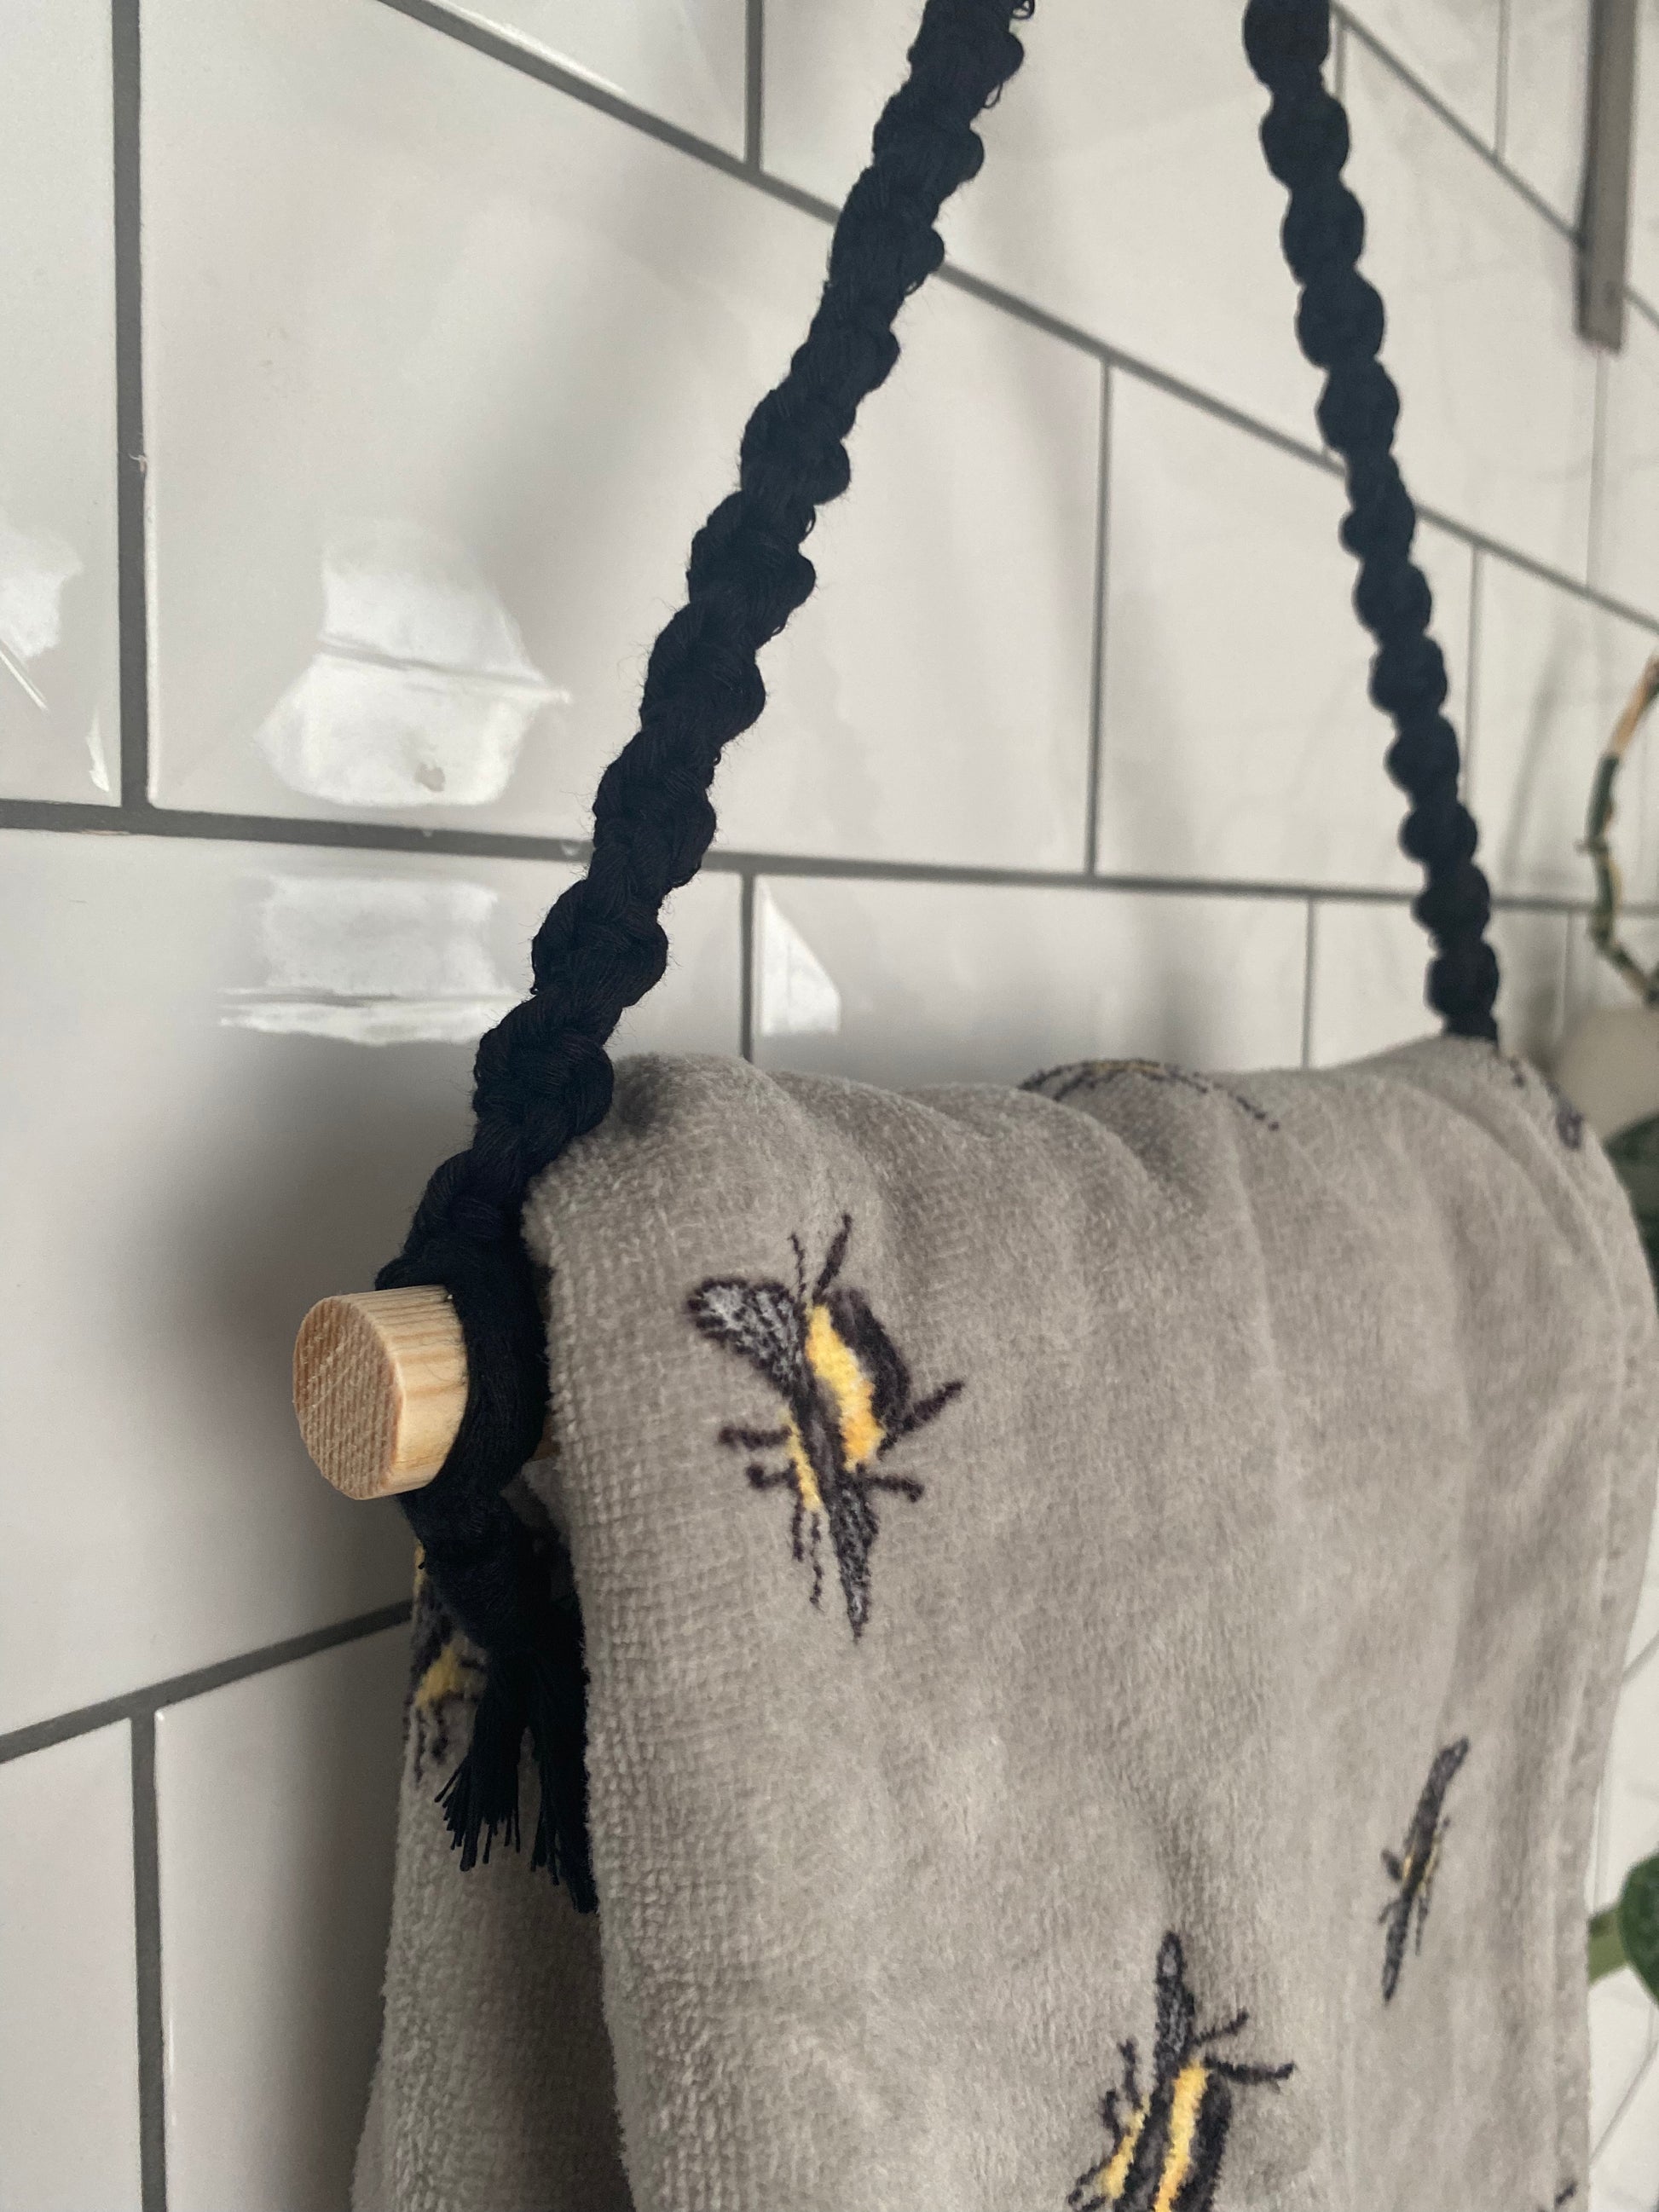 A gray towel made from sustainable recycled cotton, adorned with embroidered bees, hangs on a black braided rope looped around a wooden dowel. The eco-friendly towel is displayed against a white tiled wall, elegantly held by the Hand Towel Holder from Macra-Made-With-Love.